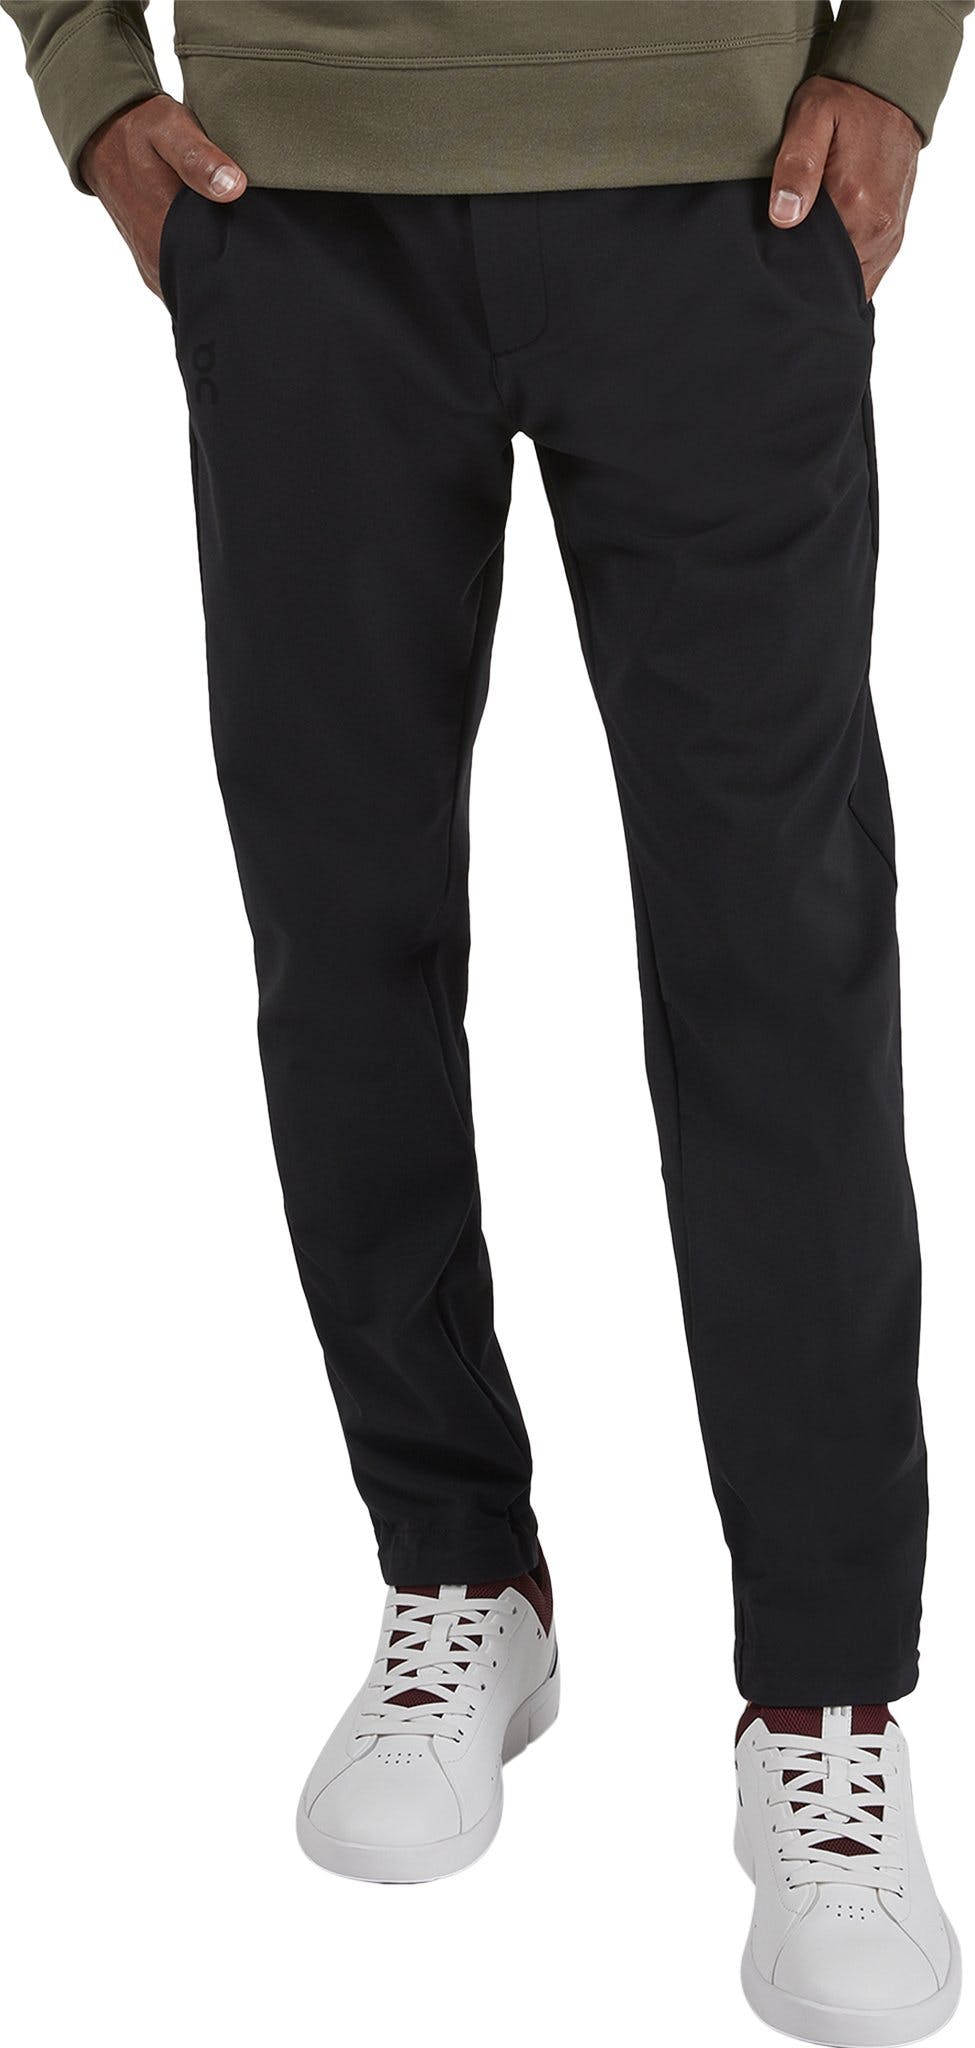 Product image for Active Pants - Men's